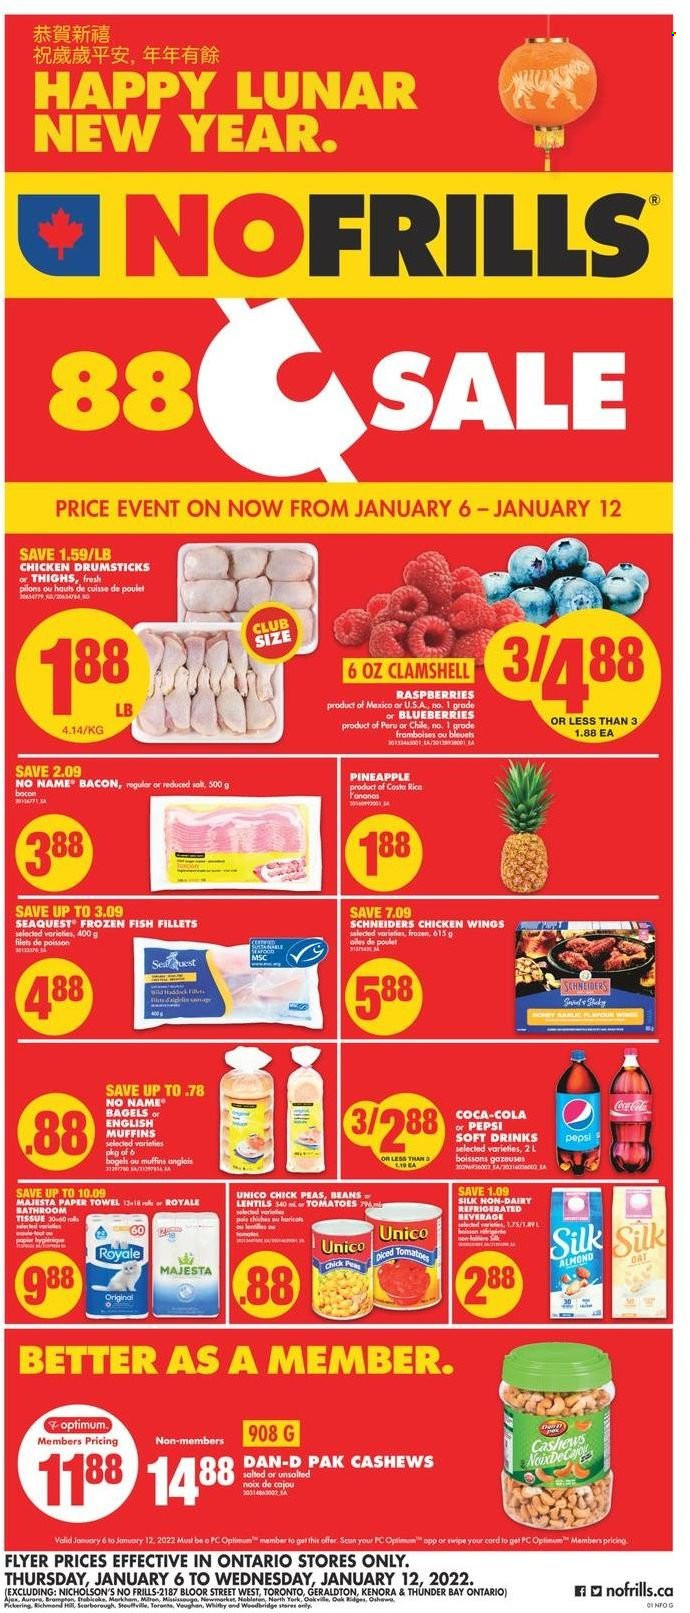 No Frills Flyer - January 06, 2022 - January 12, 2022 - Sales products - bagels, english muffins, beans, tomatoes, blueberries, pineapple, fish fillets, fish, No Name, bacon, Silk, chicken wings, lentils, Dan-D Pak, rice, cashews, Coca-Cola, Pepsi, soft drink, chicken drumsticks, chicken meat, bath tissue, paper towels, Optimum. Page 1.